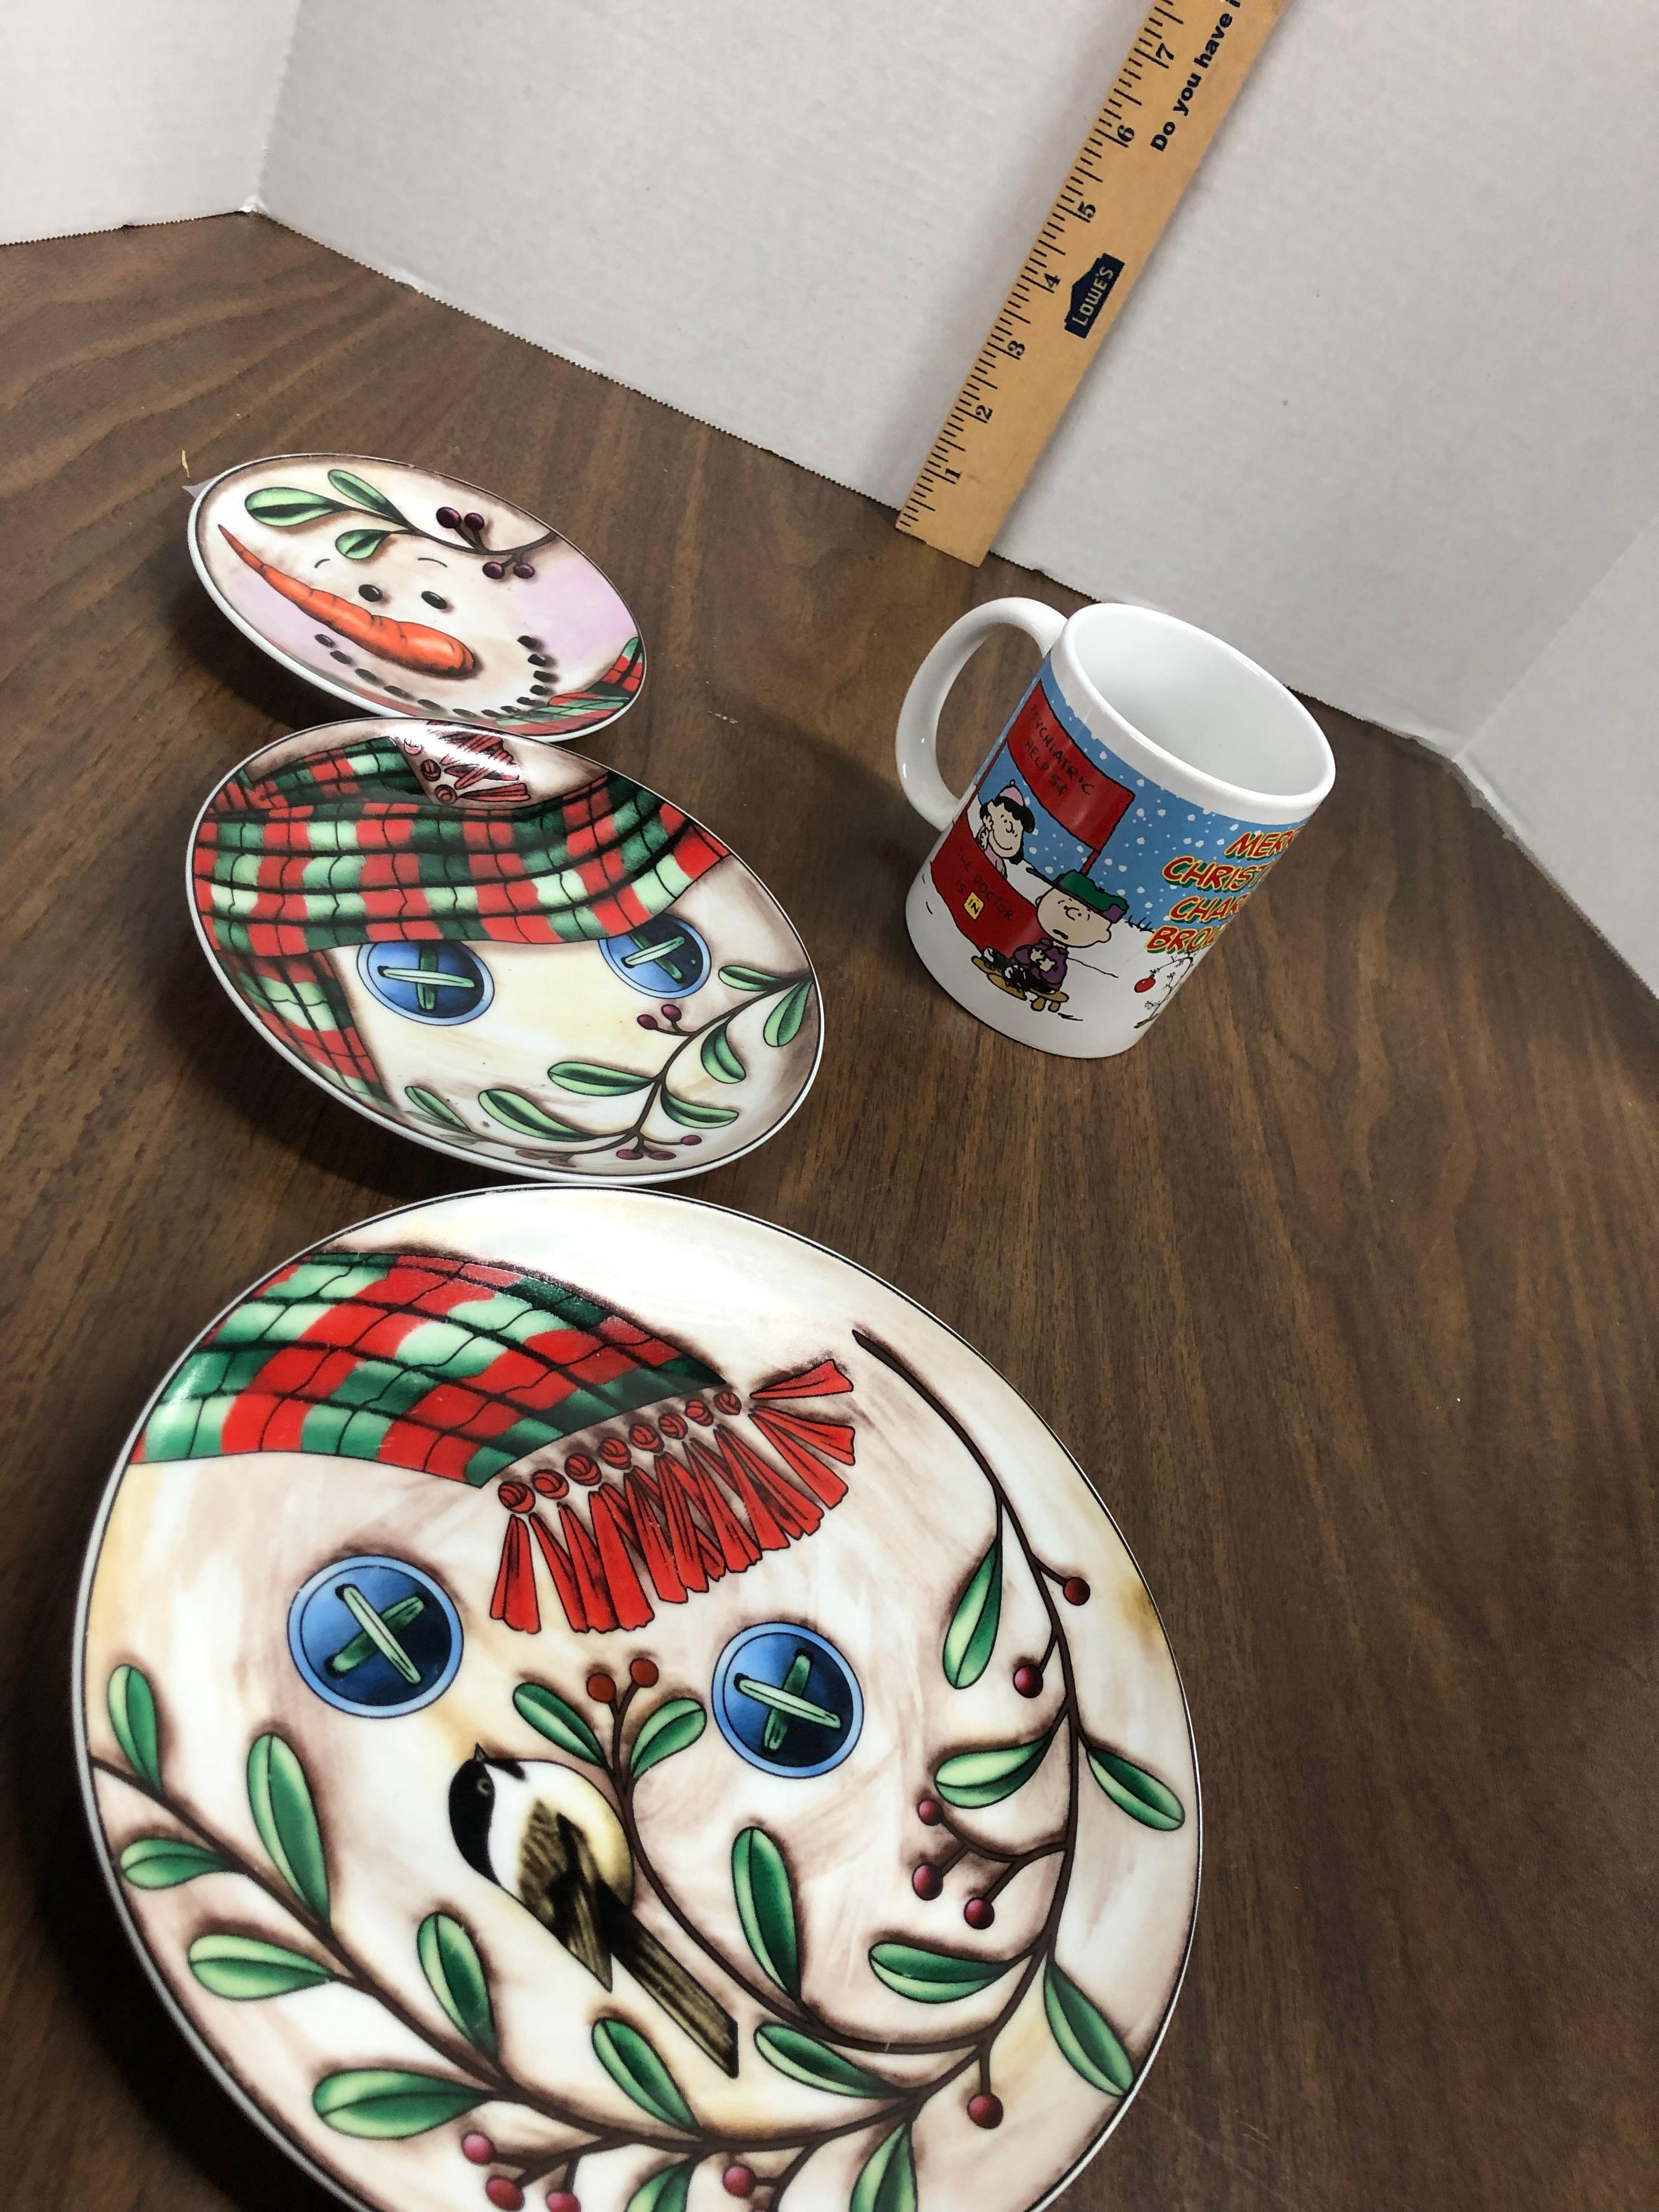 Christmas Lot, dishes, snowman display dishes, serving dishes, etc